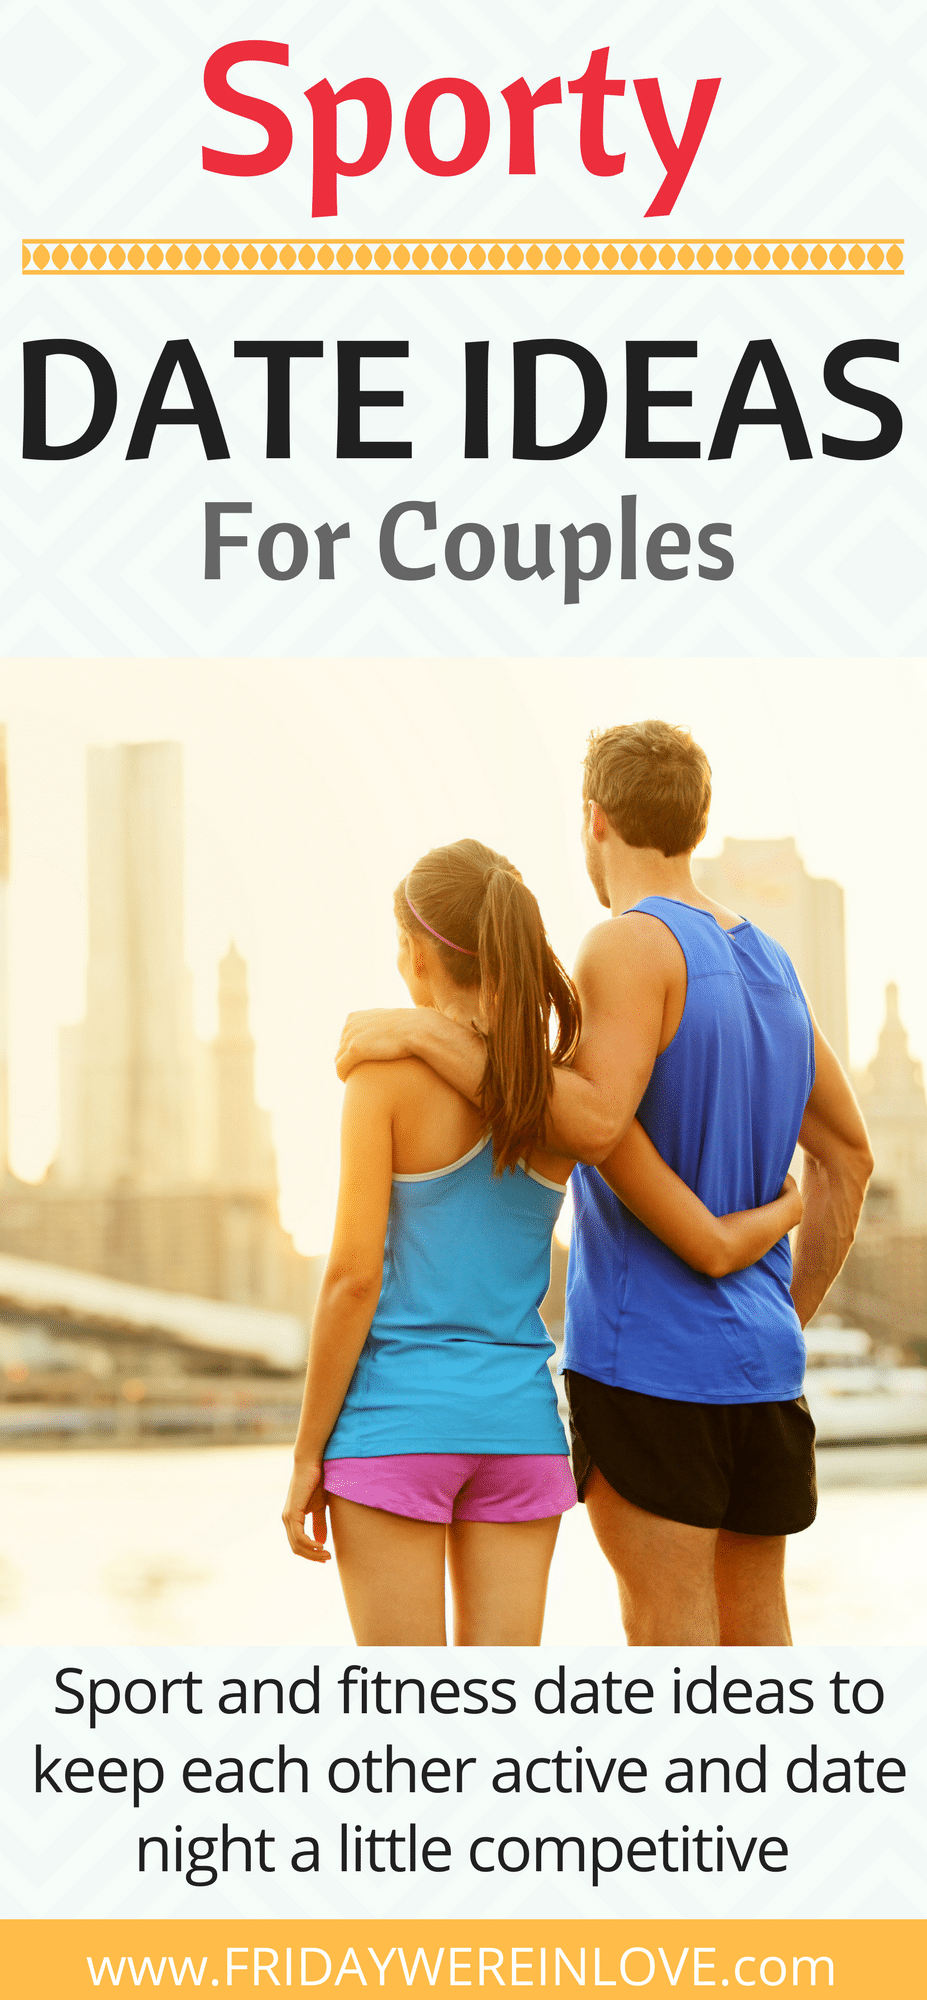 Sporty Date Ideas for couples_ sports based date night ideas to keep each other active and date night a little competitive. 